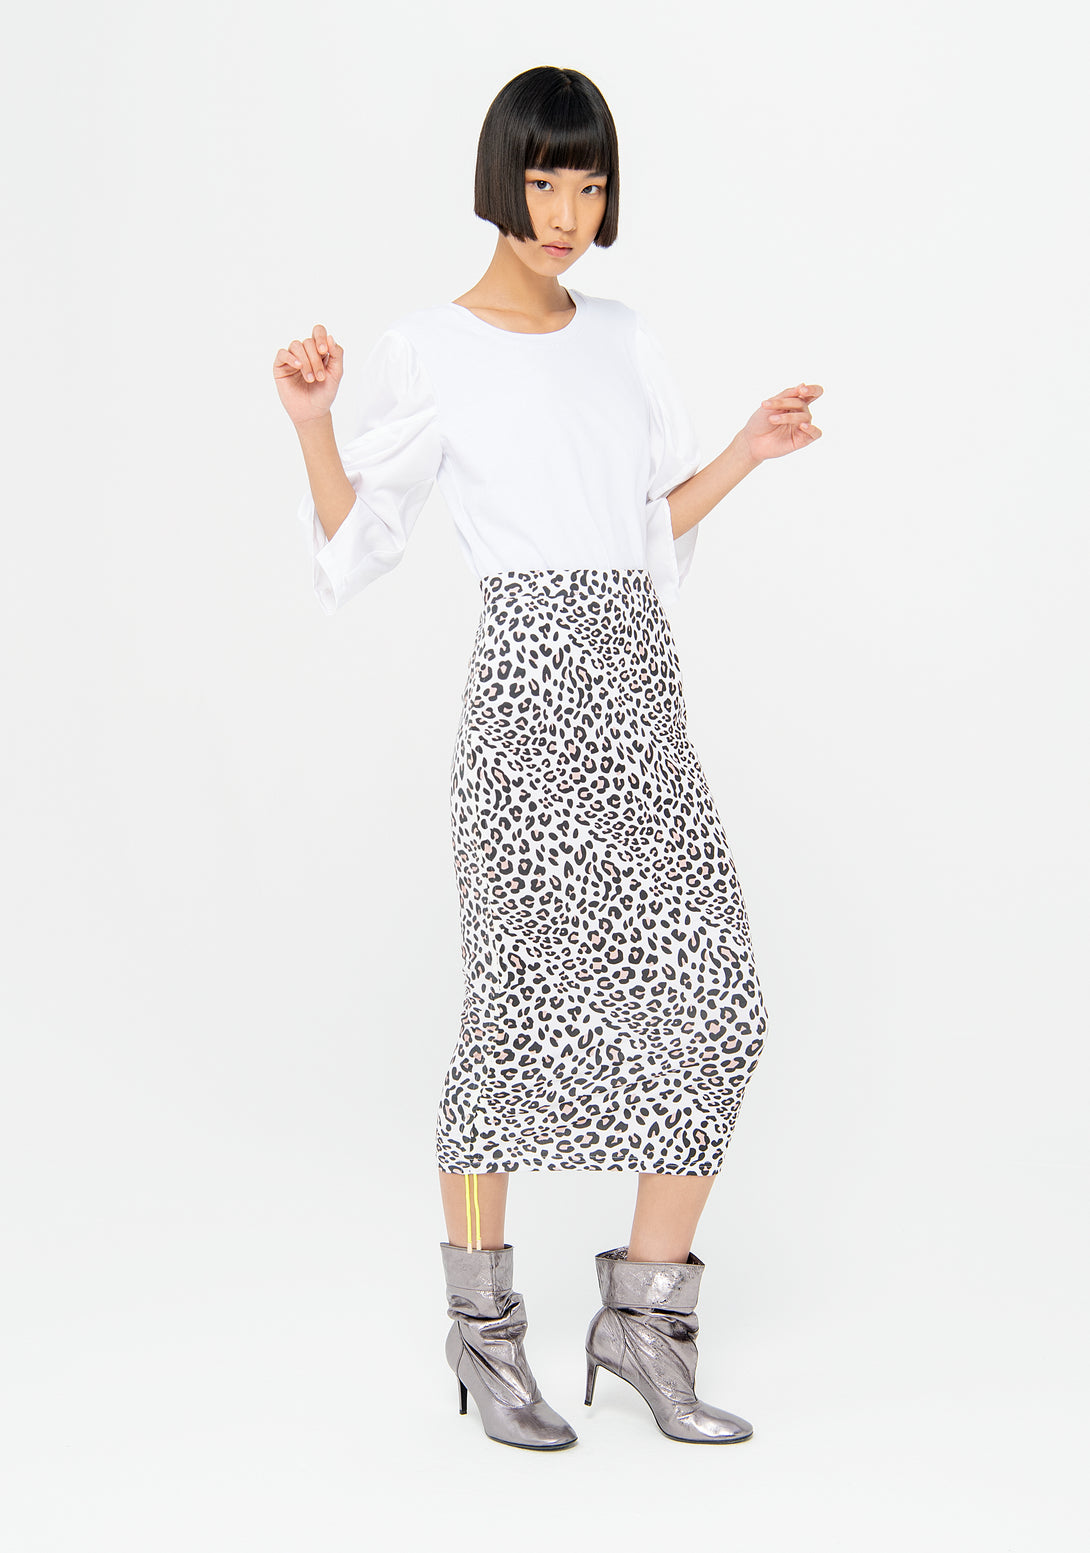 Long skirt slim fit made in jersey with animalier pattern Fracomina F322SG2002J401L7-453